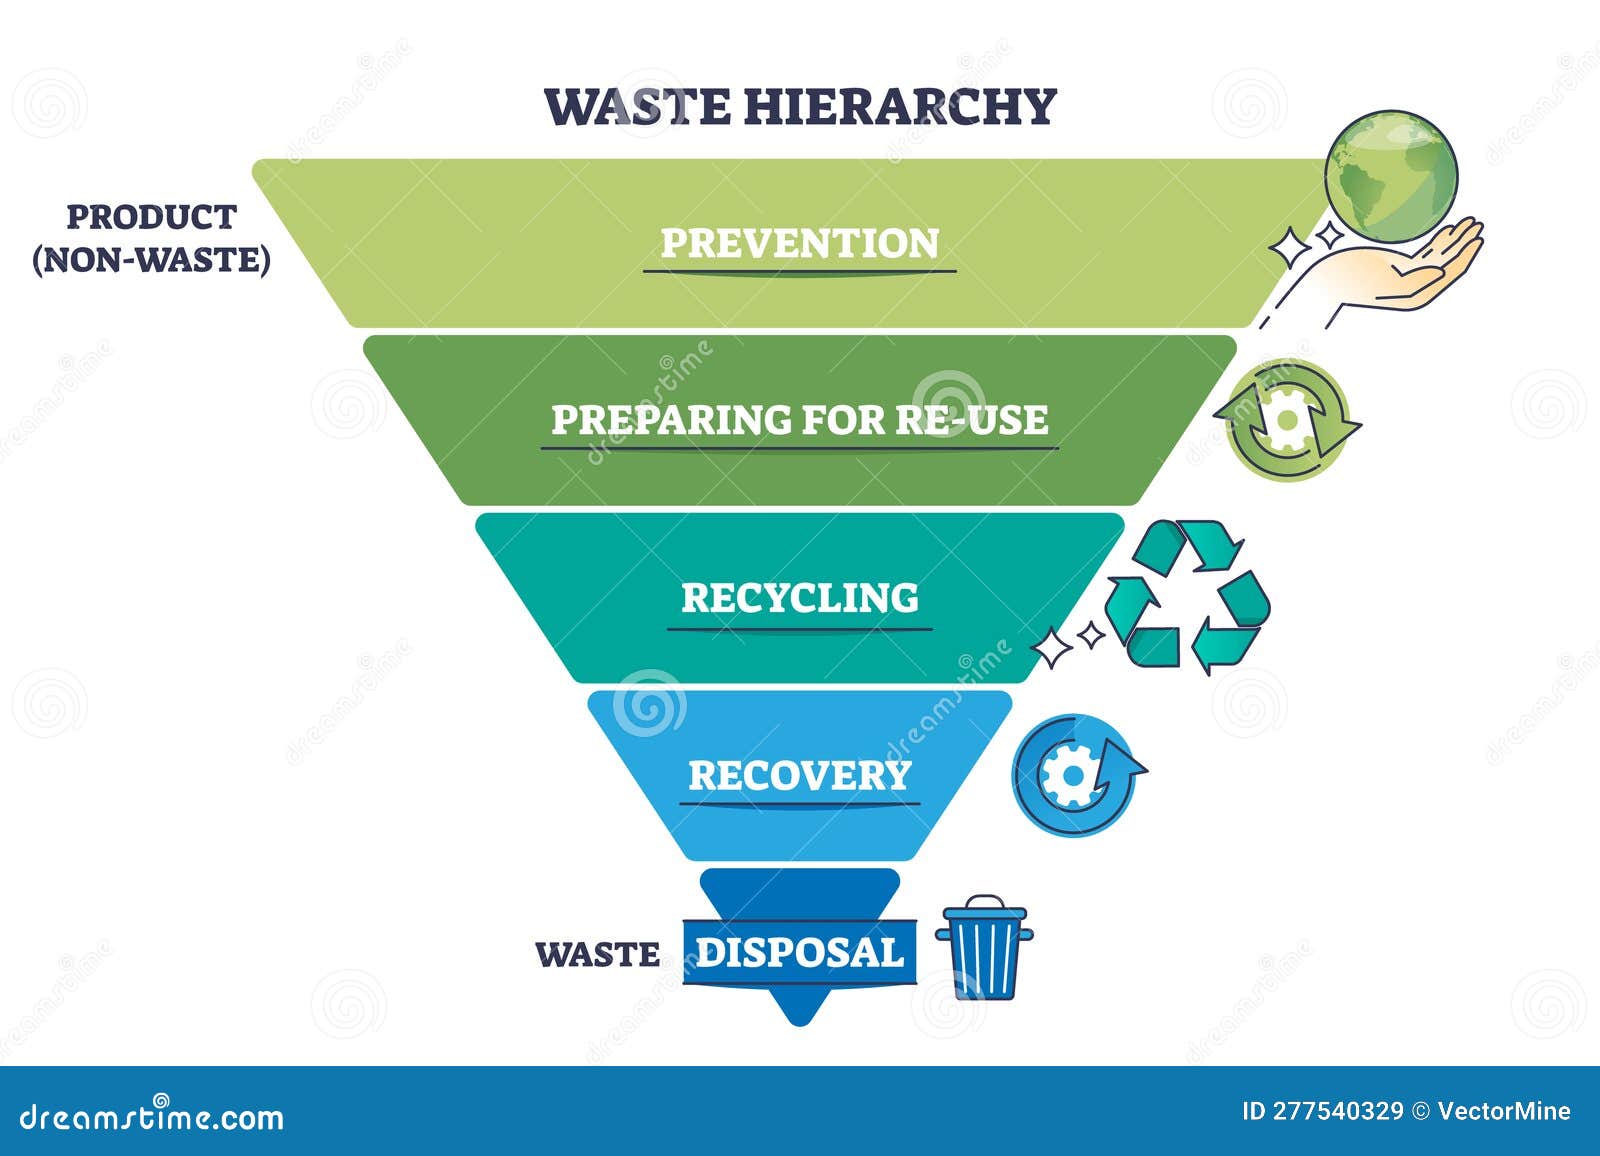 waste hierarchy for product reusage or disposal triangle outline diagram